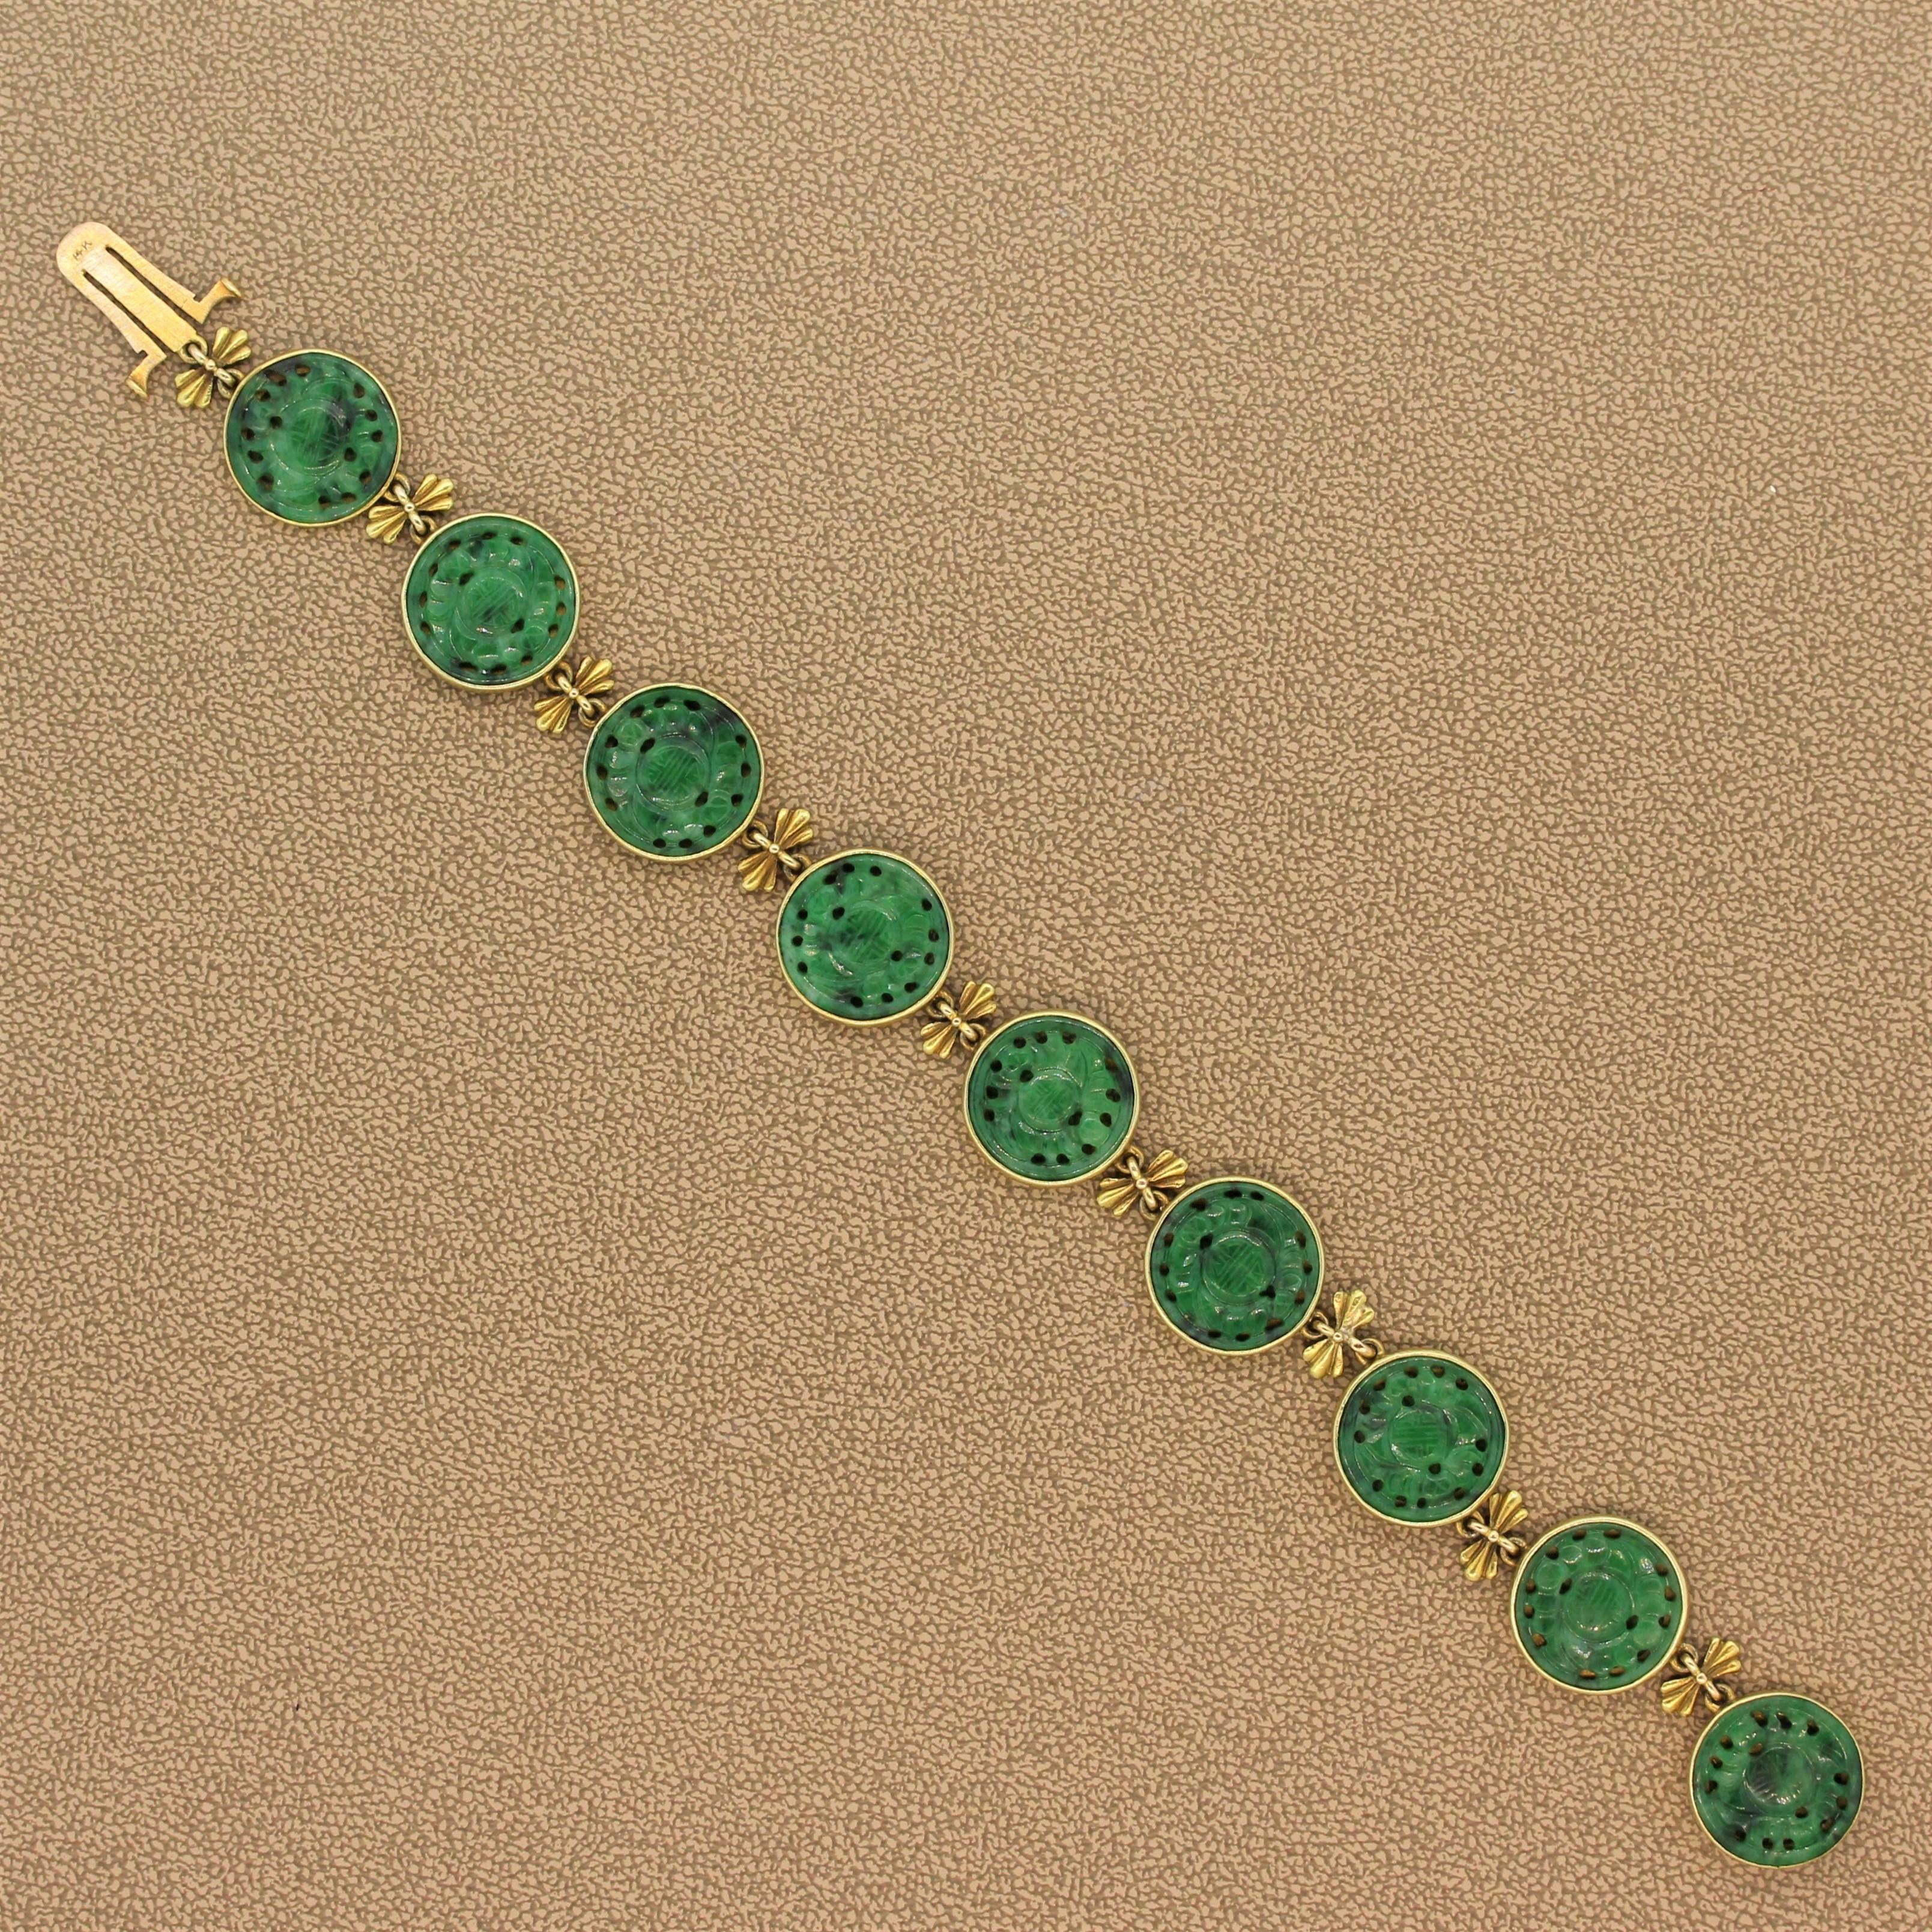 An expertly crafted estate bracelet featuring nine dark green carved nephrite bezel set in 18K yellow gold. The links are attached using ornamental gold bows. The secure discreet lock also serves as a part of the design.

Bracelet Length: 8.00